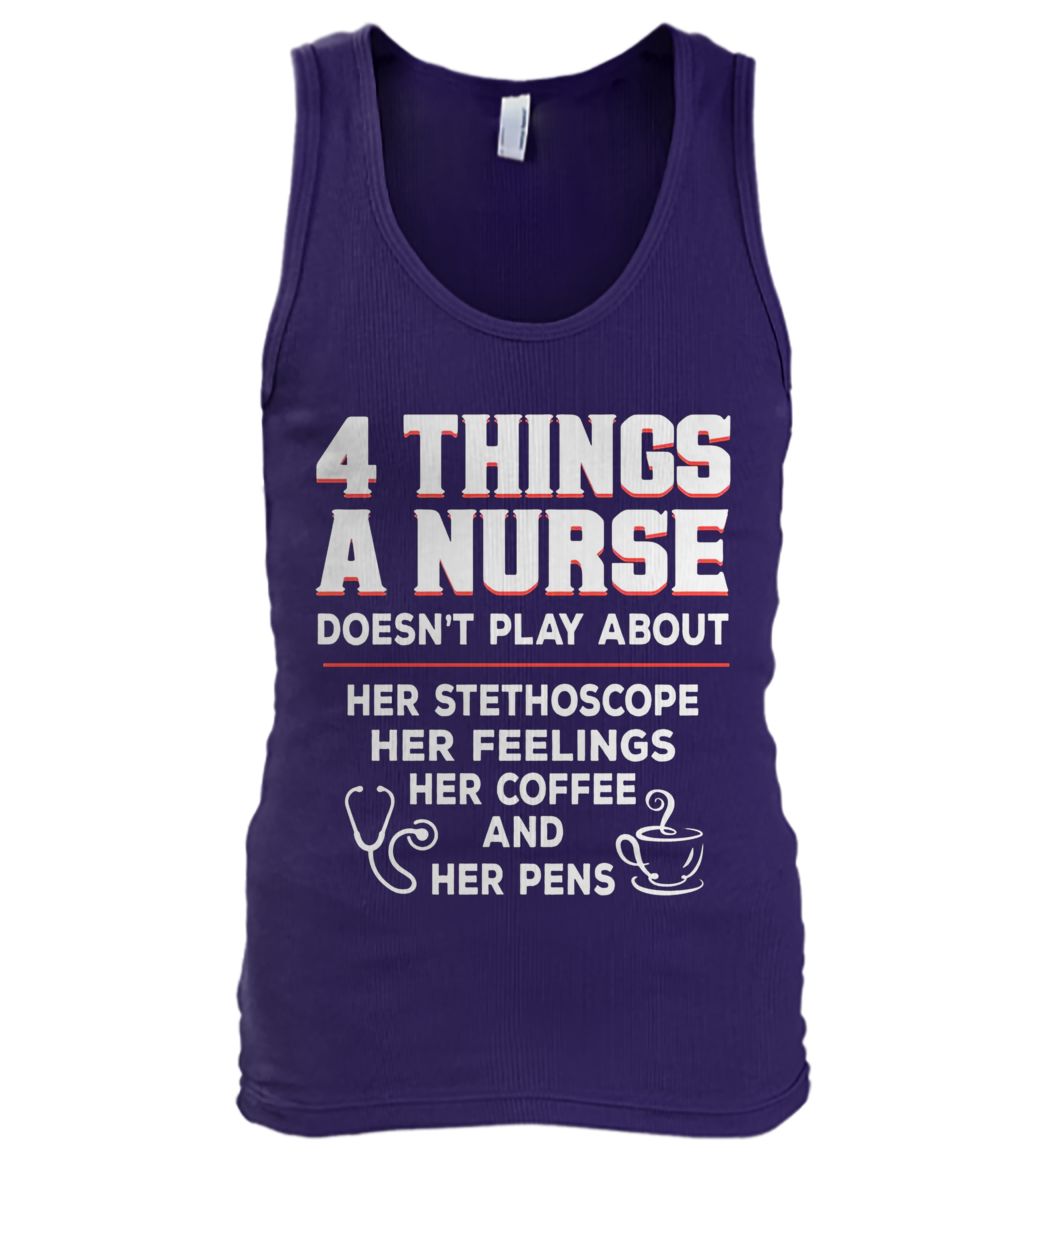 4 things a nurse doesn't play about her stethoscope men's tank top